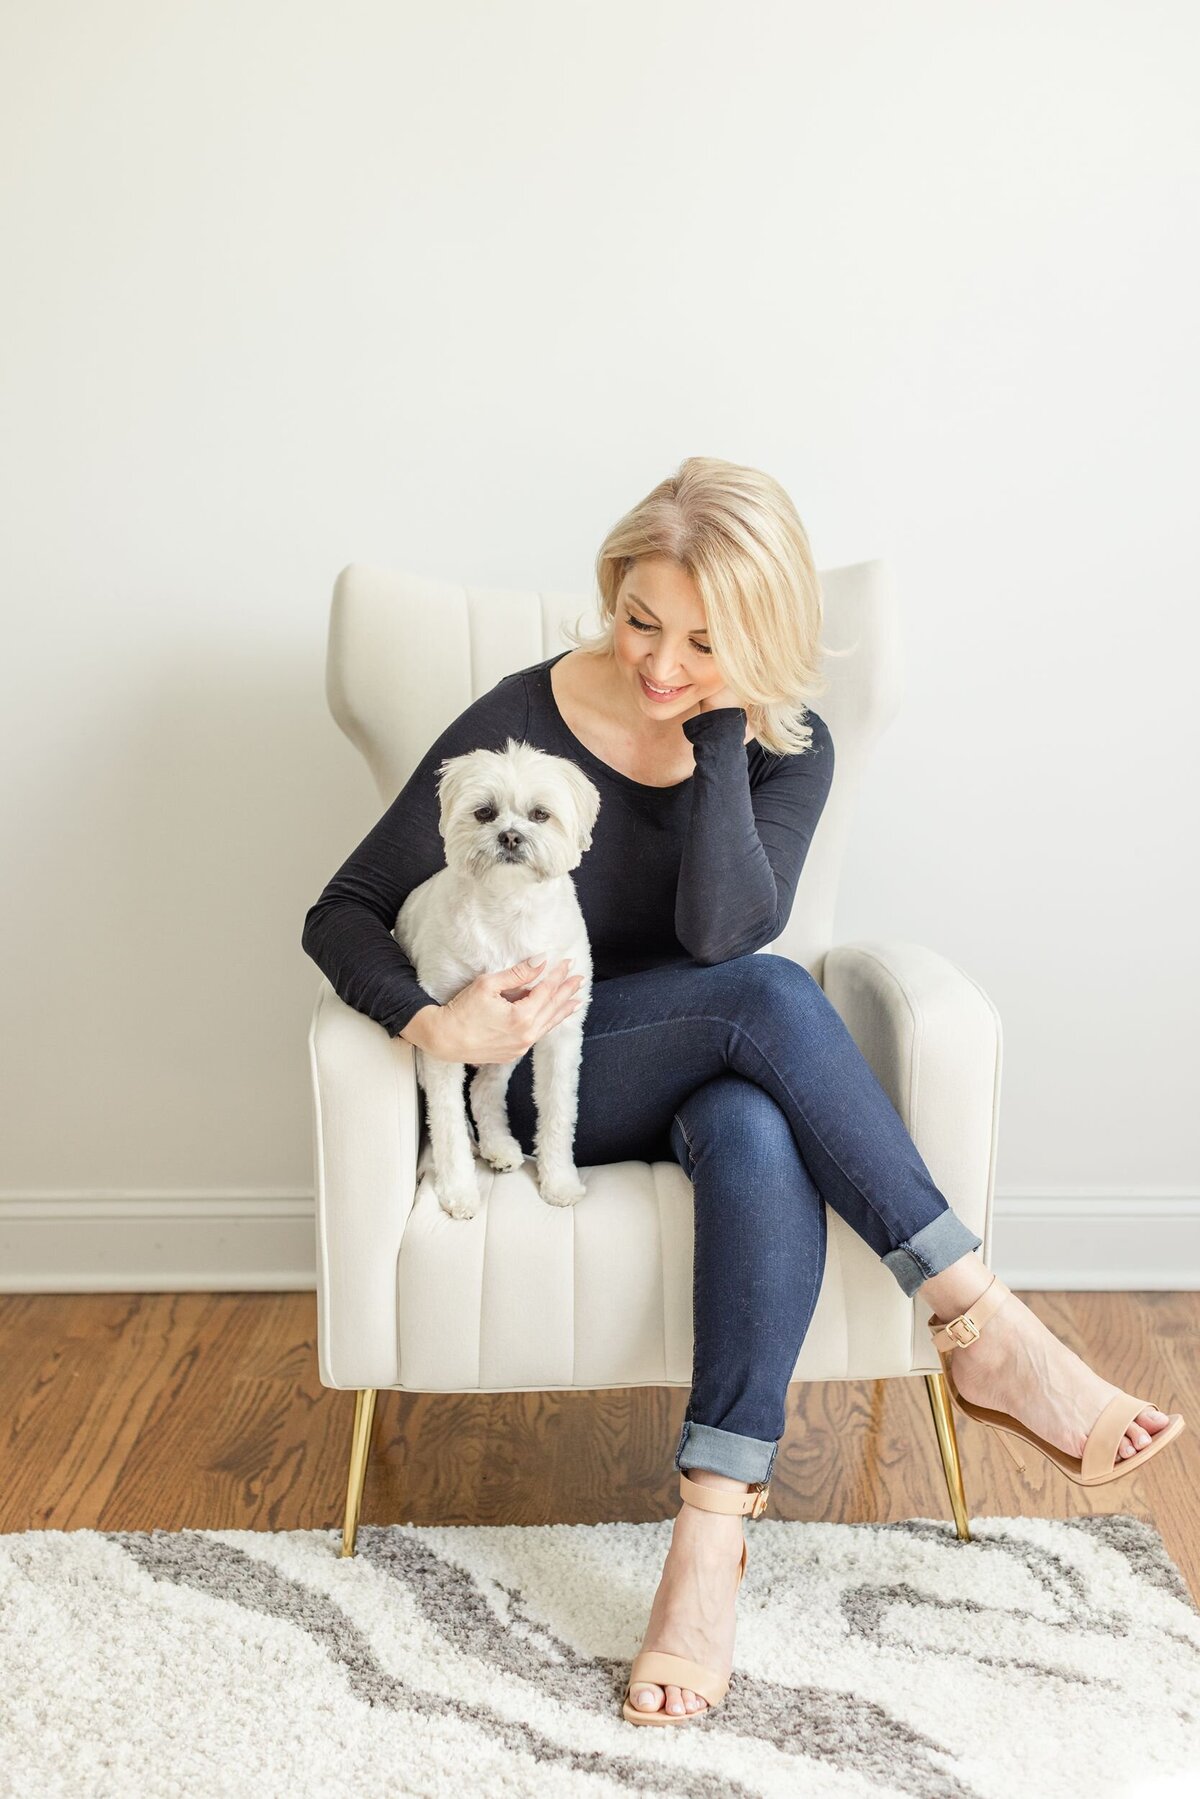 Woman sitting on chair with white dog